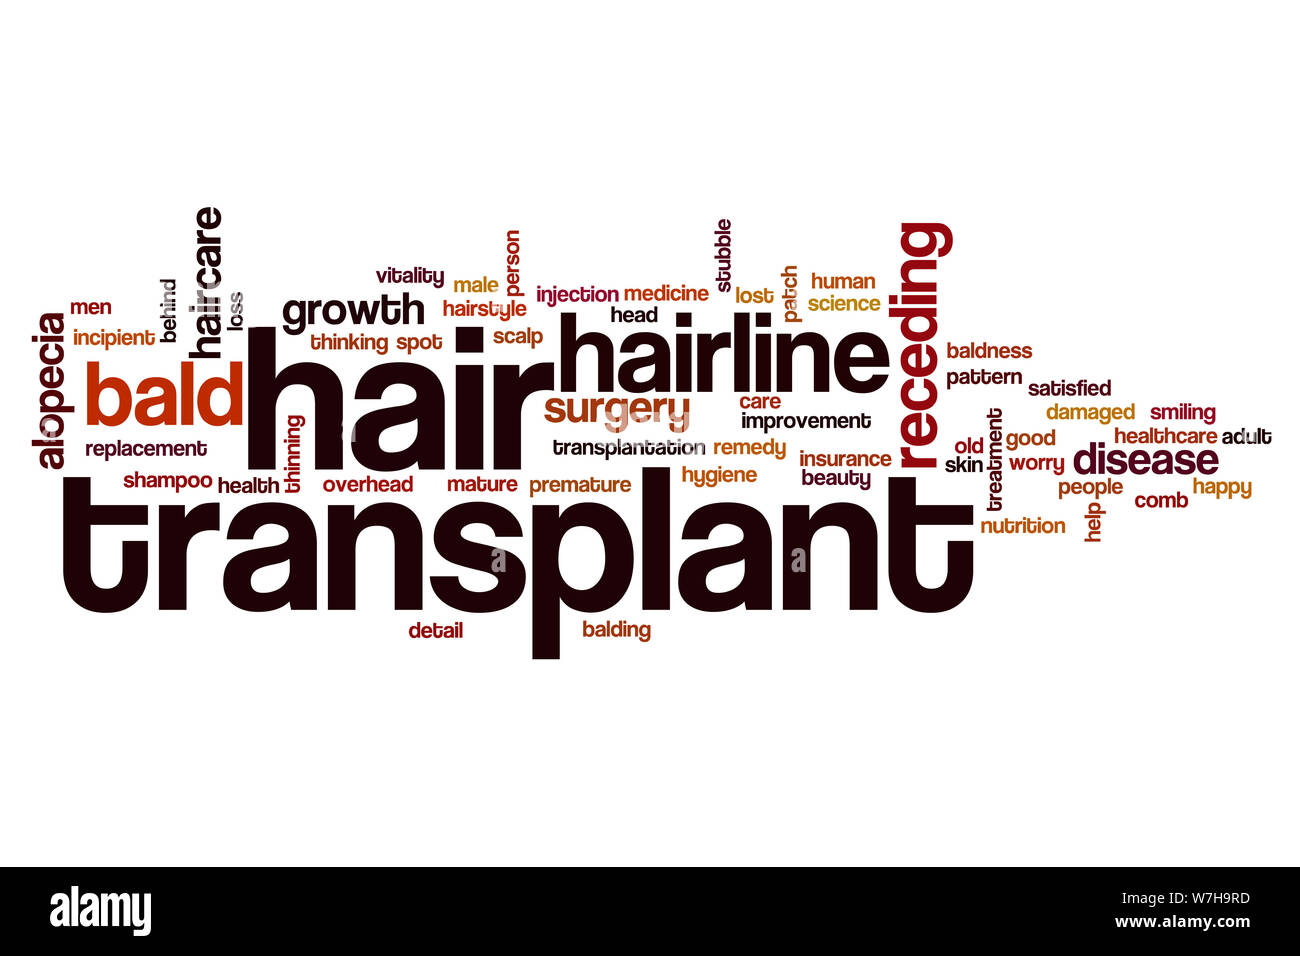 Hair transplant word cloud concept Stock Photo